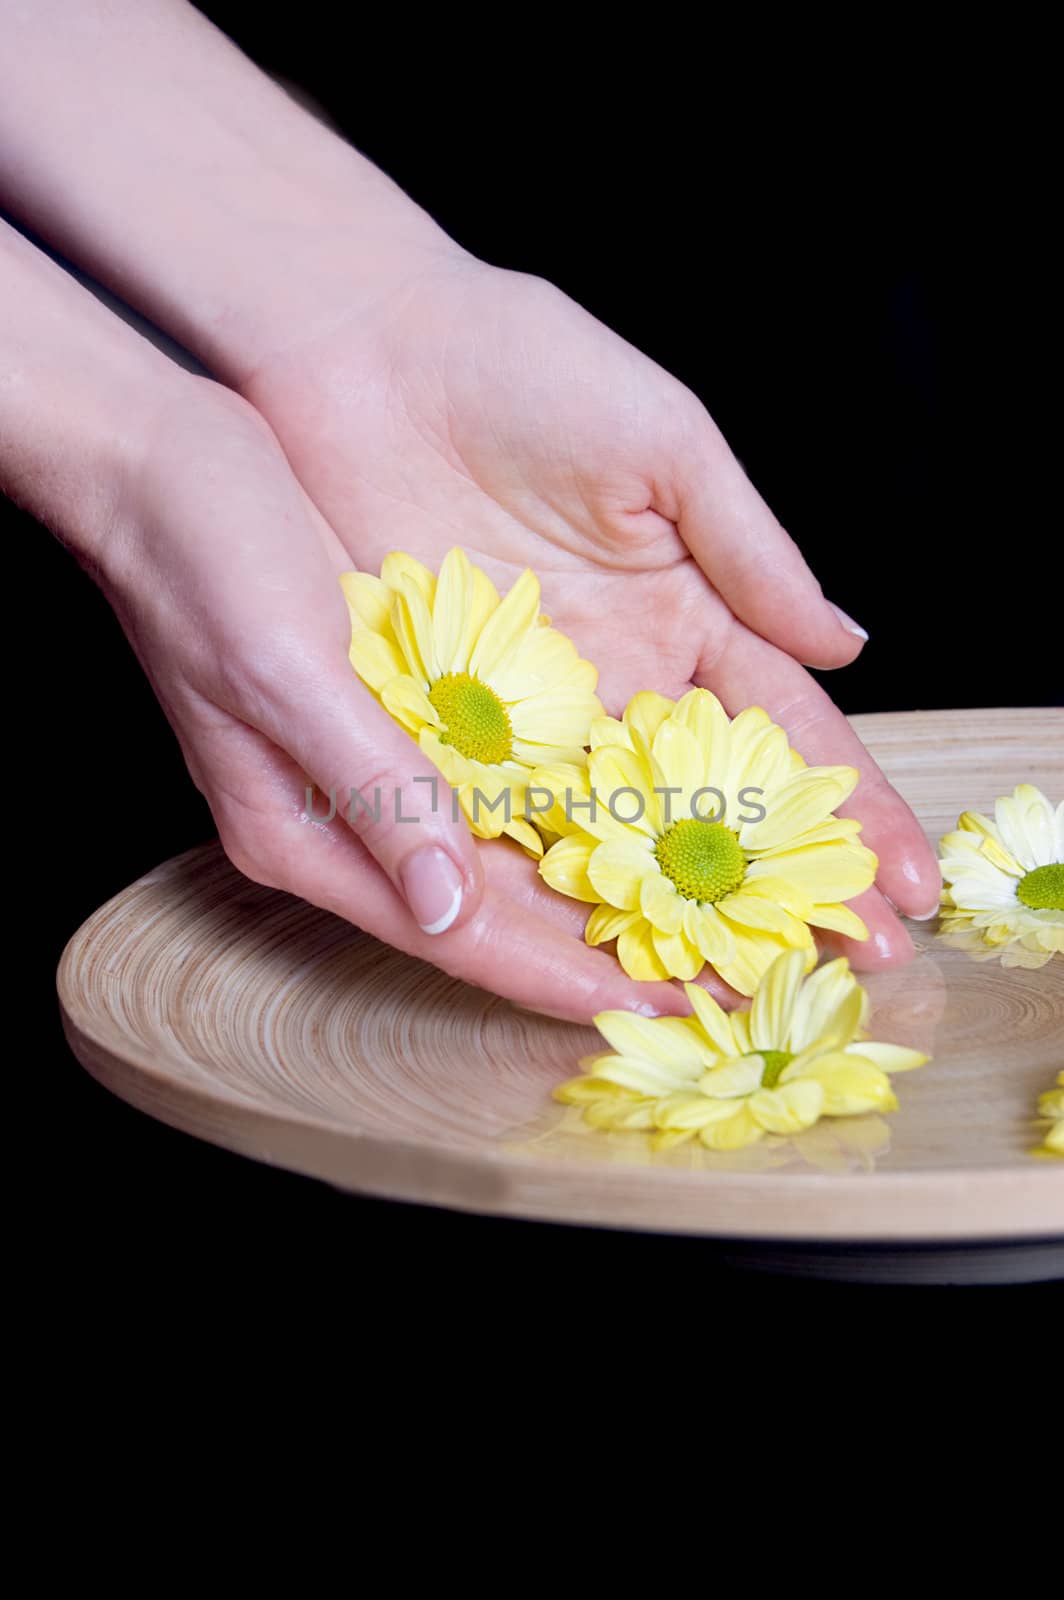 Woman hands and flower in bucket of water isolatedon black